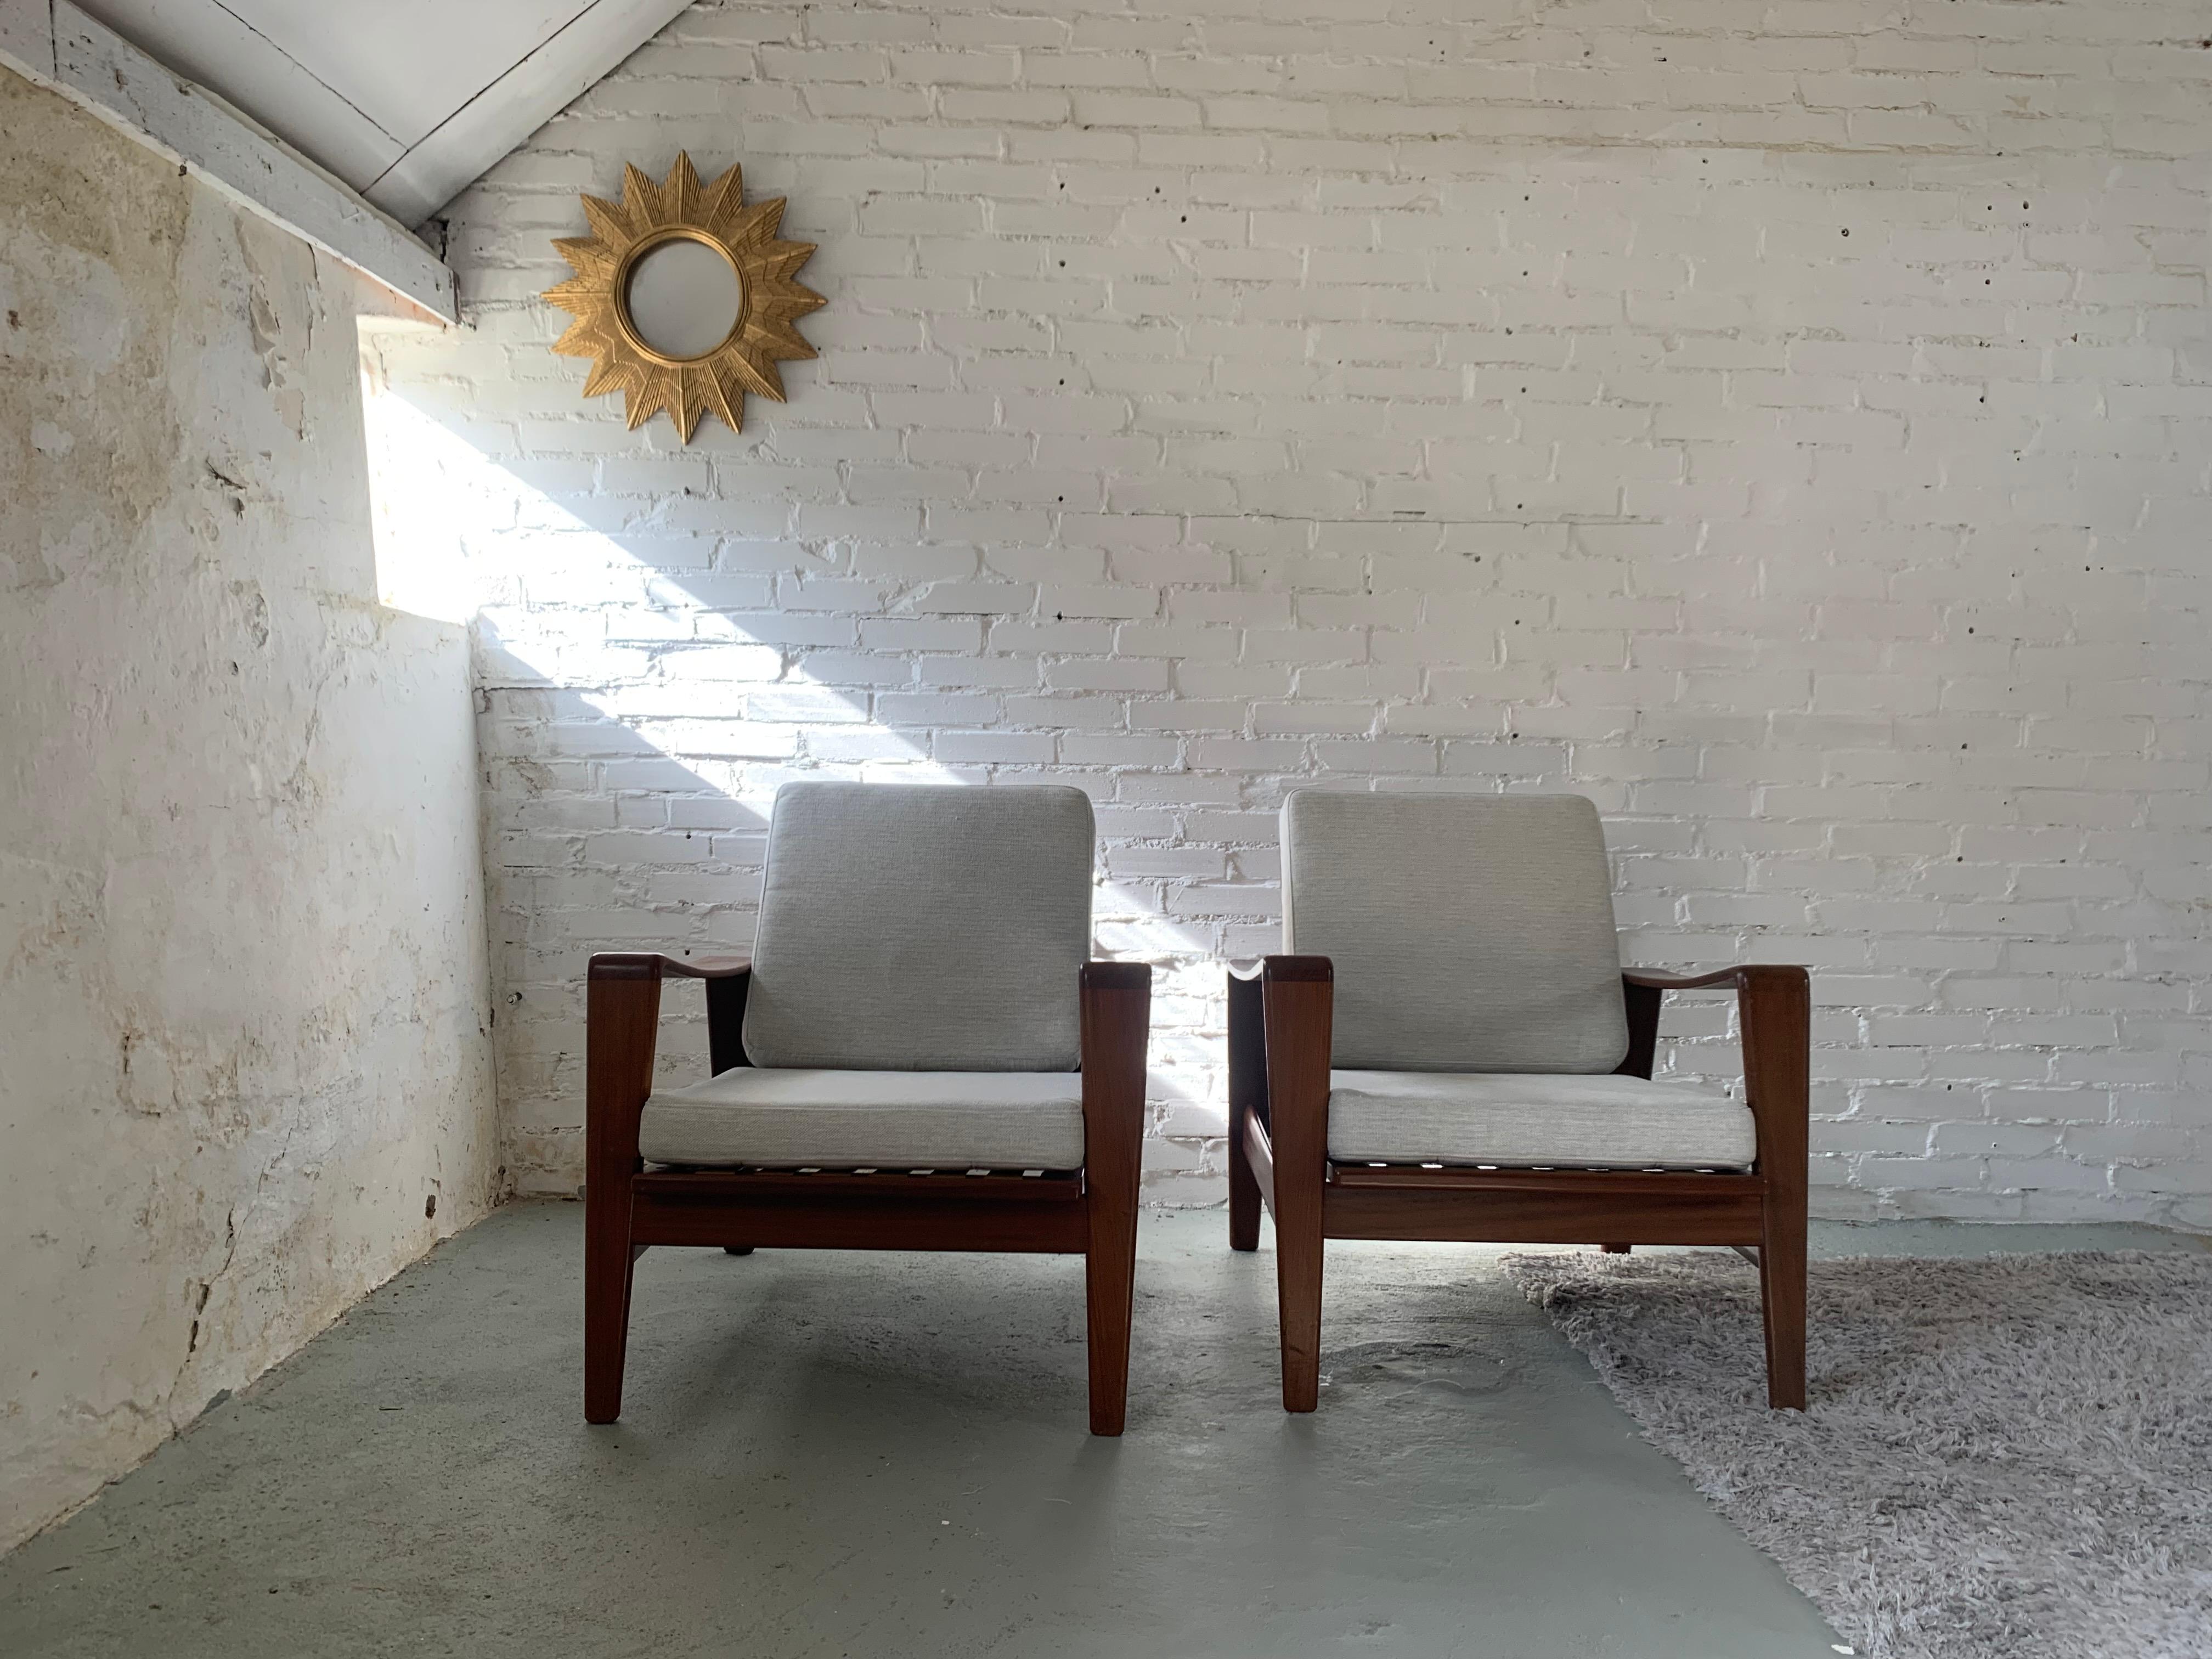 Pair of easy chairs model no. 35 designed by Arne Wahl Iversen, manufactured by Komfort, Denmark, 1960. These comfortable chairs have solid teak wooden frames and white upholstered cushions. Great mid century furniture.